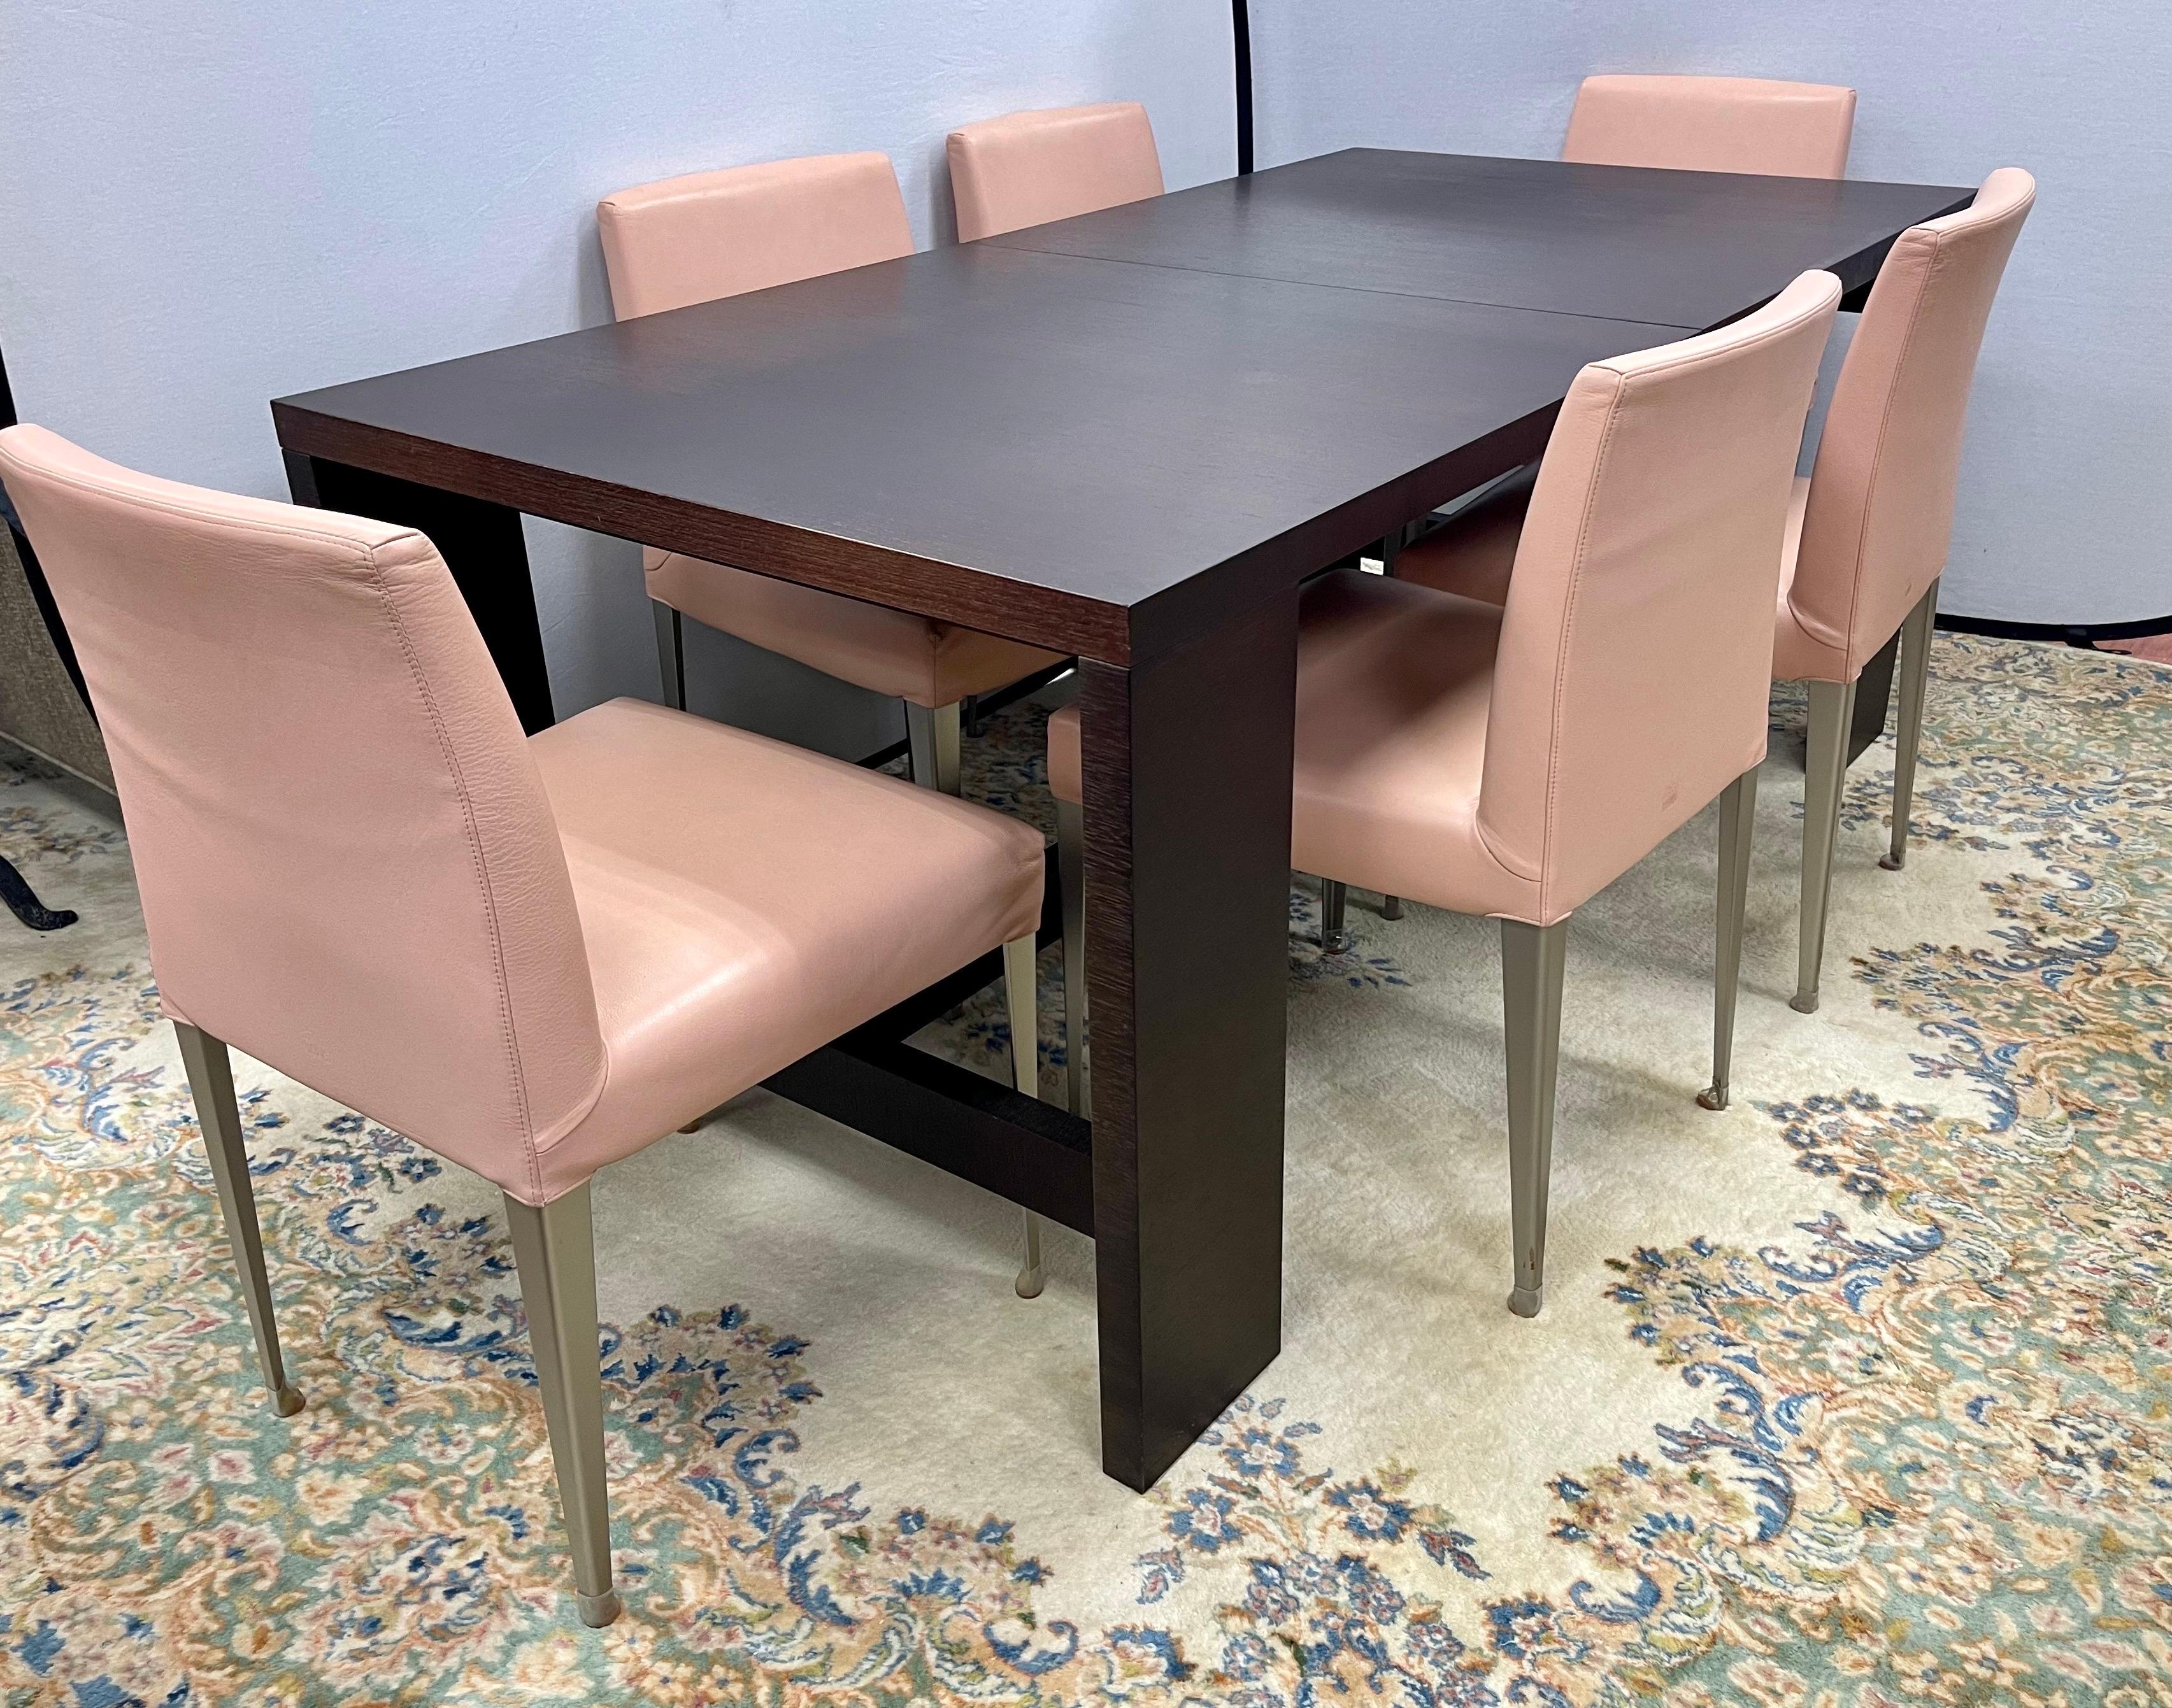 Exquisite B&B Italia dining room set with table that expands with hidden leaf attached to the underside of dining room table. Table is 71”wide without leaf inserted. Leaf is 23.5” wide.
The six chairs are a pale pink leather and have the B&B Italia